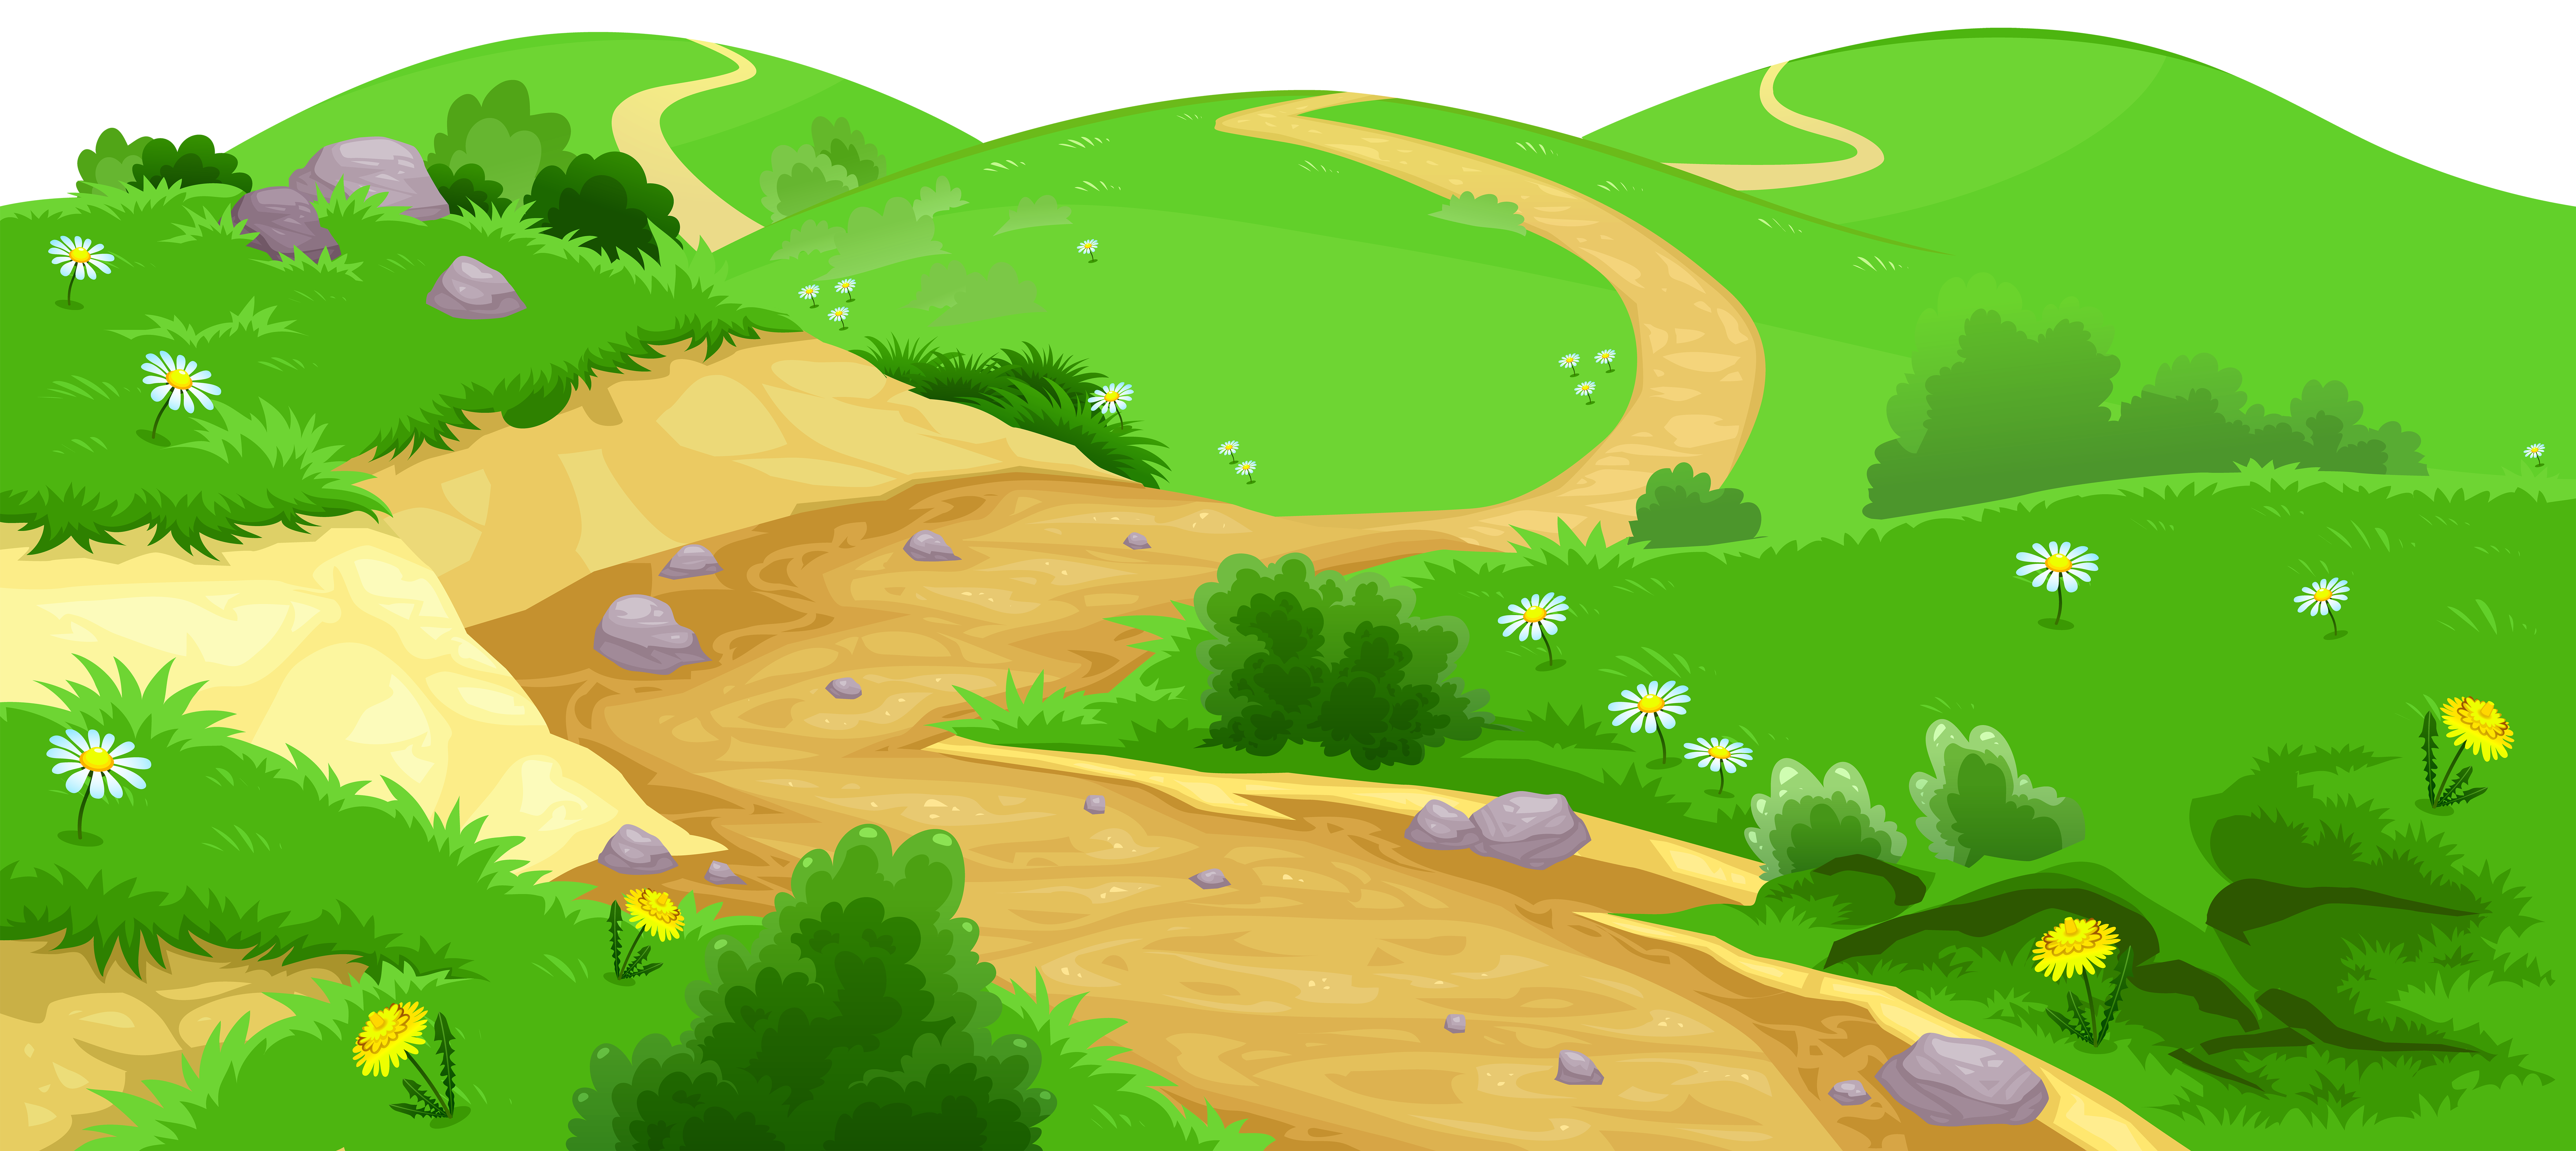 Valley transparent png image. Mountain clipart ground